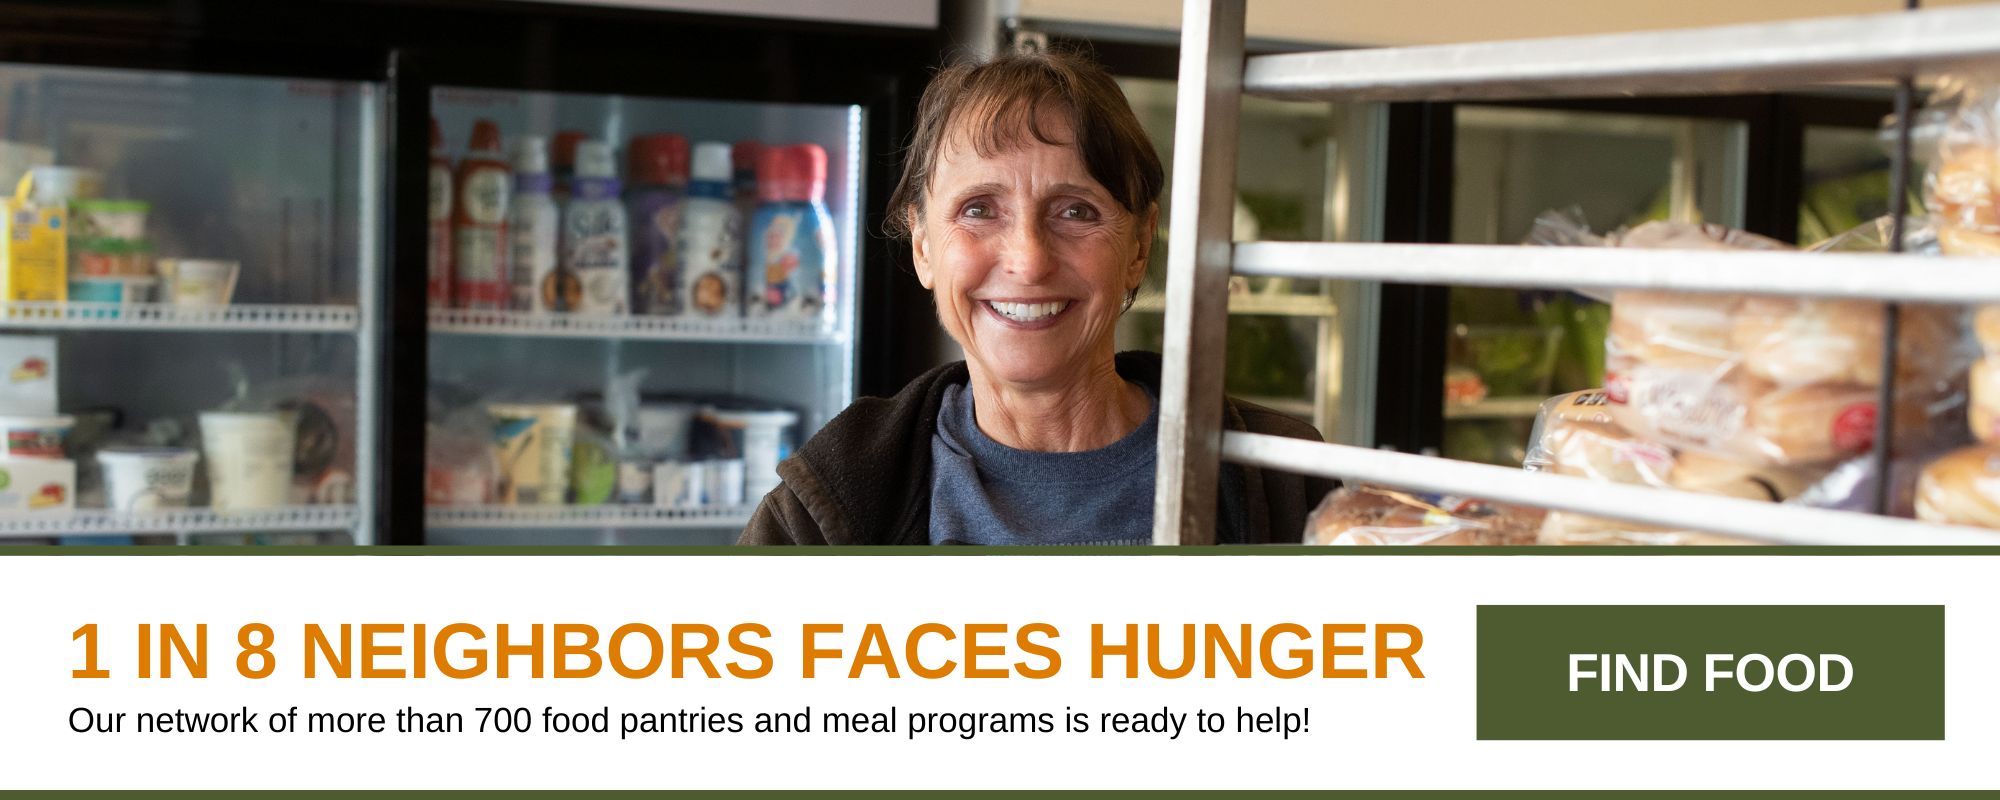 1 in 8 neighbors faces hunger. Our network of more than 700 food pantries and meal programs is ready to help! Find food